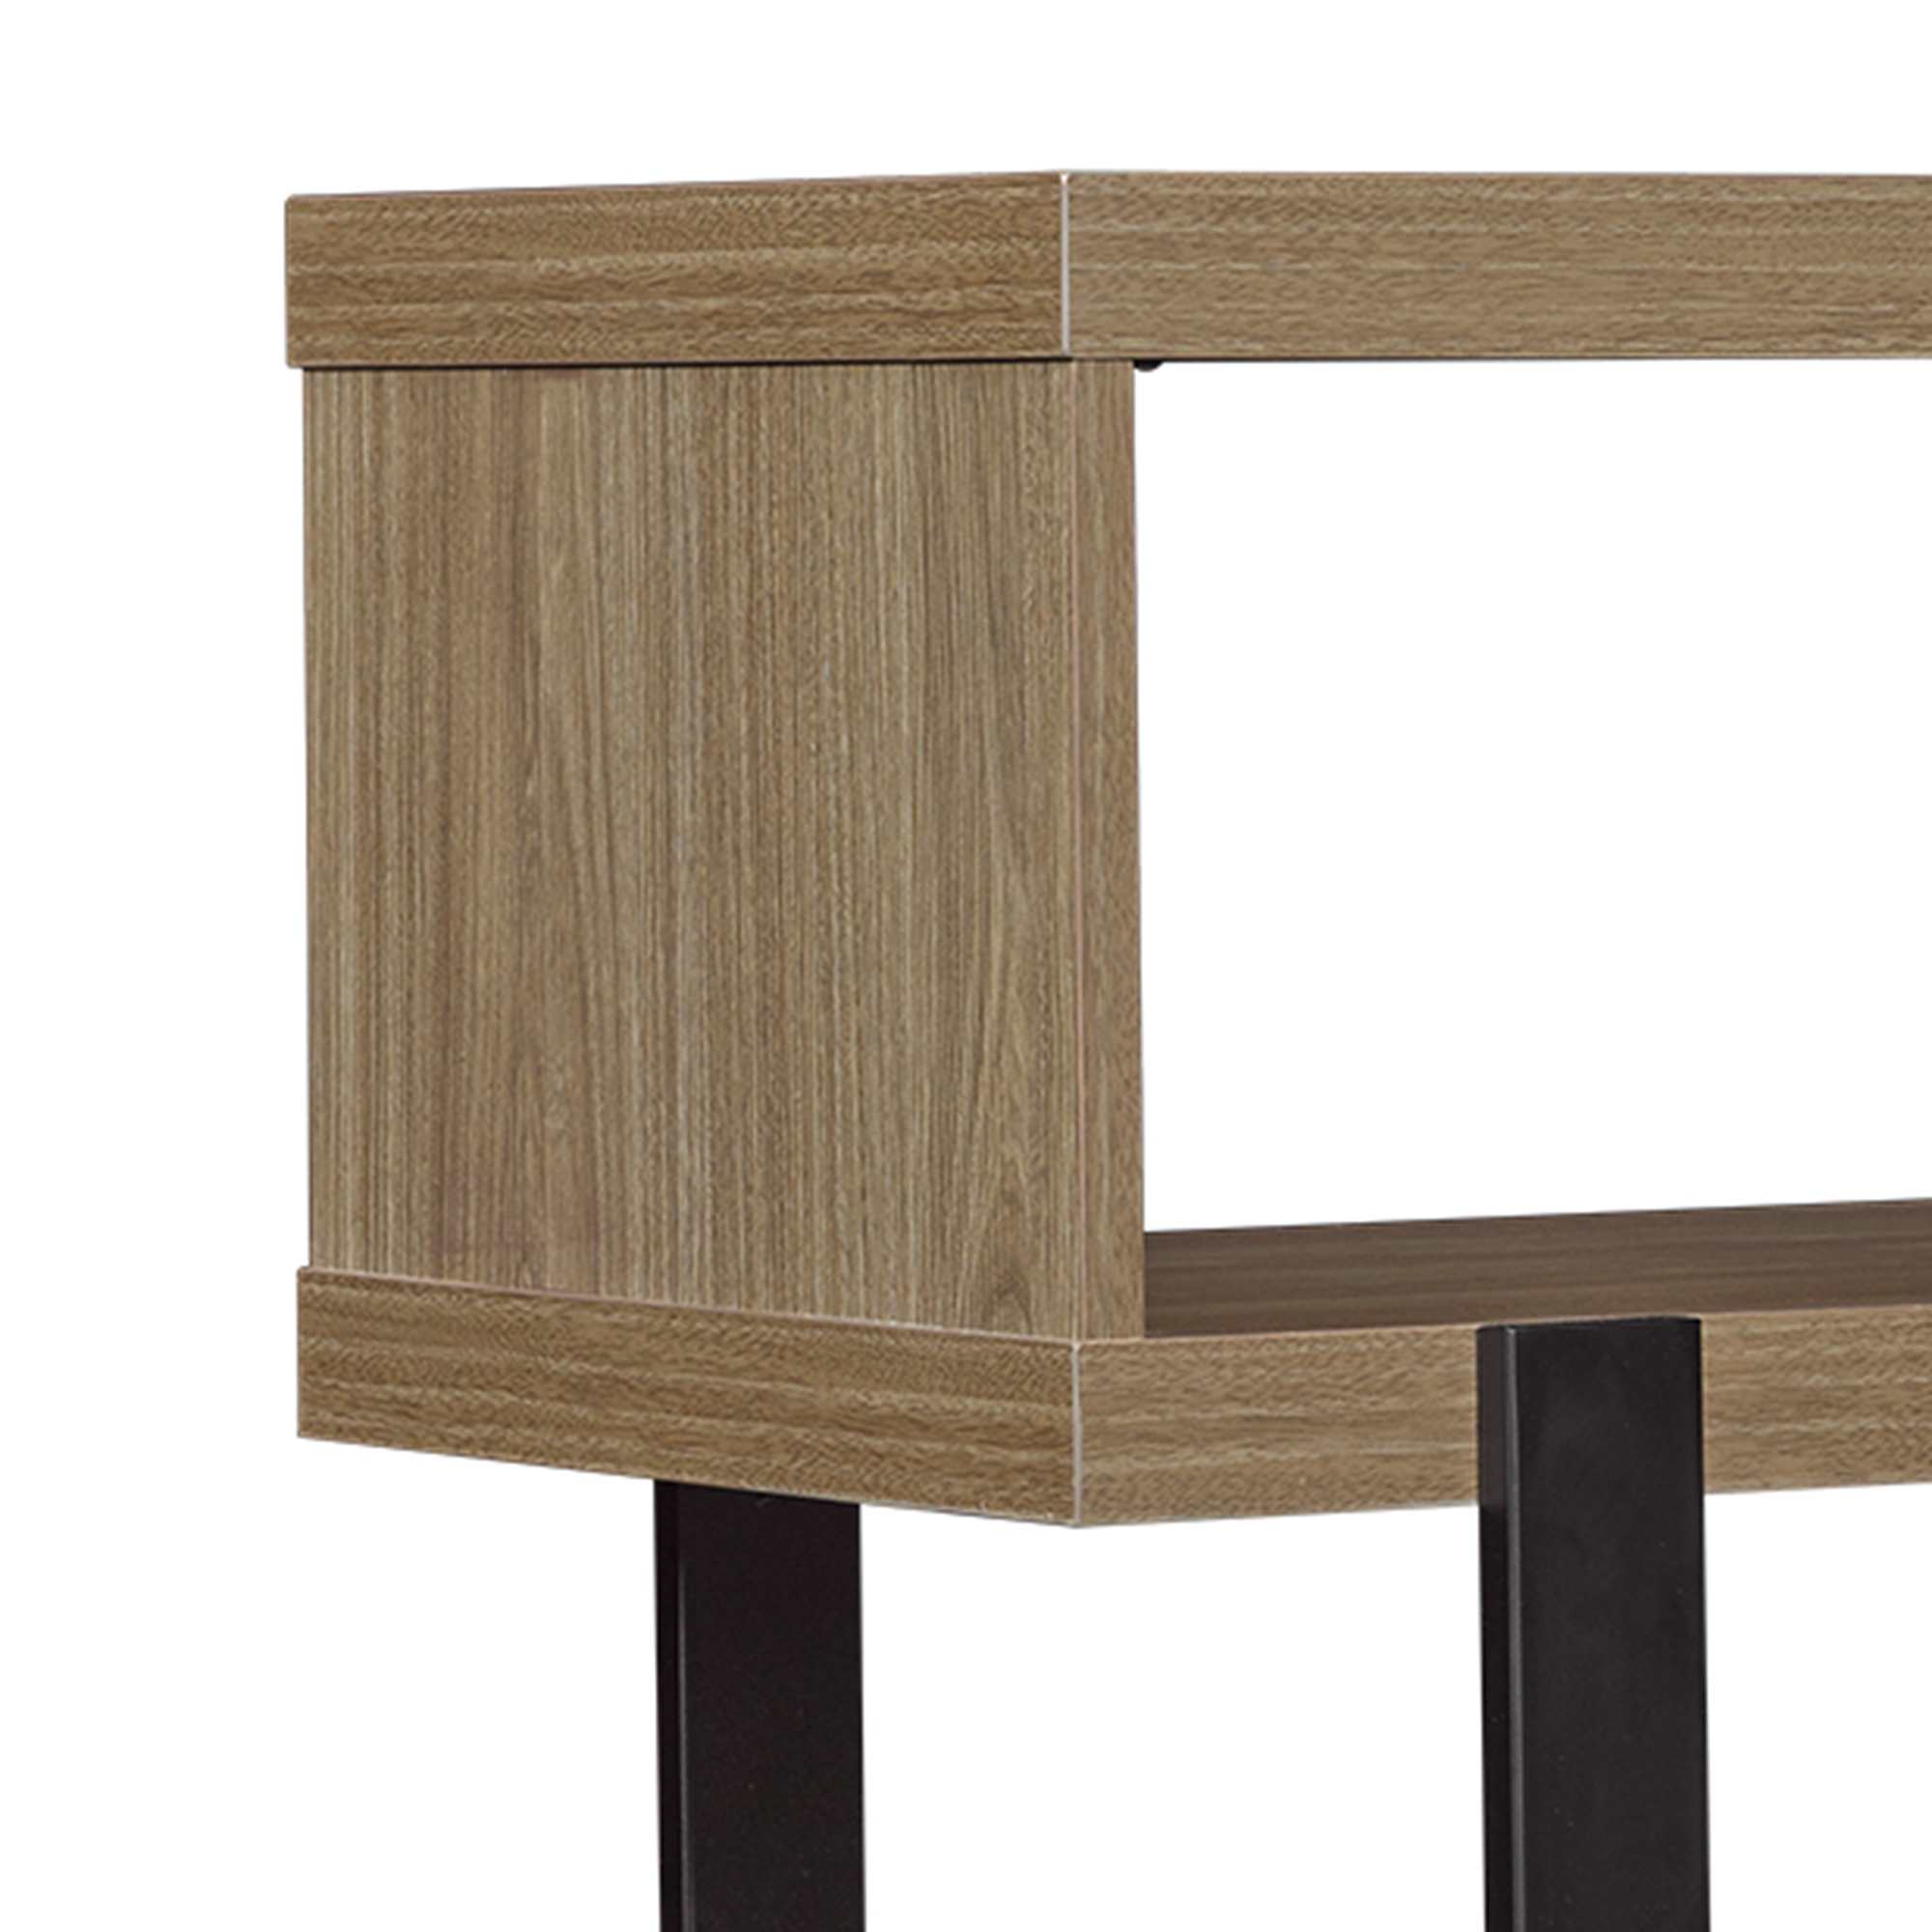 *DNP*Springtown TV Stand for TVs up to 55 inches Screen Size with S-Shape Open Shelves in Oyster Walnut - image 4 of 6